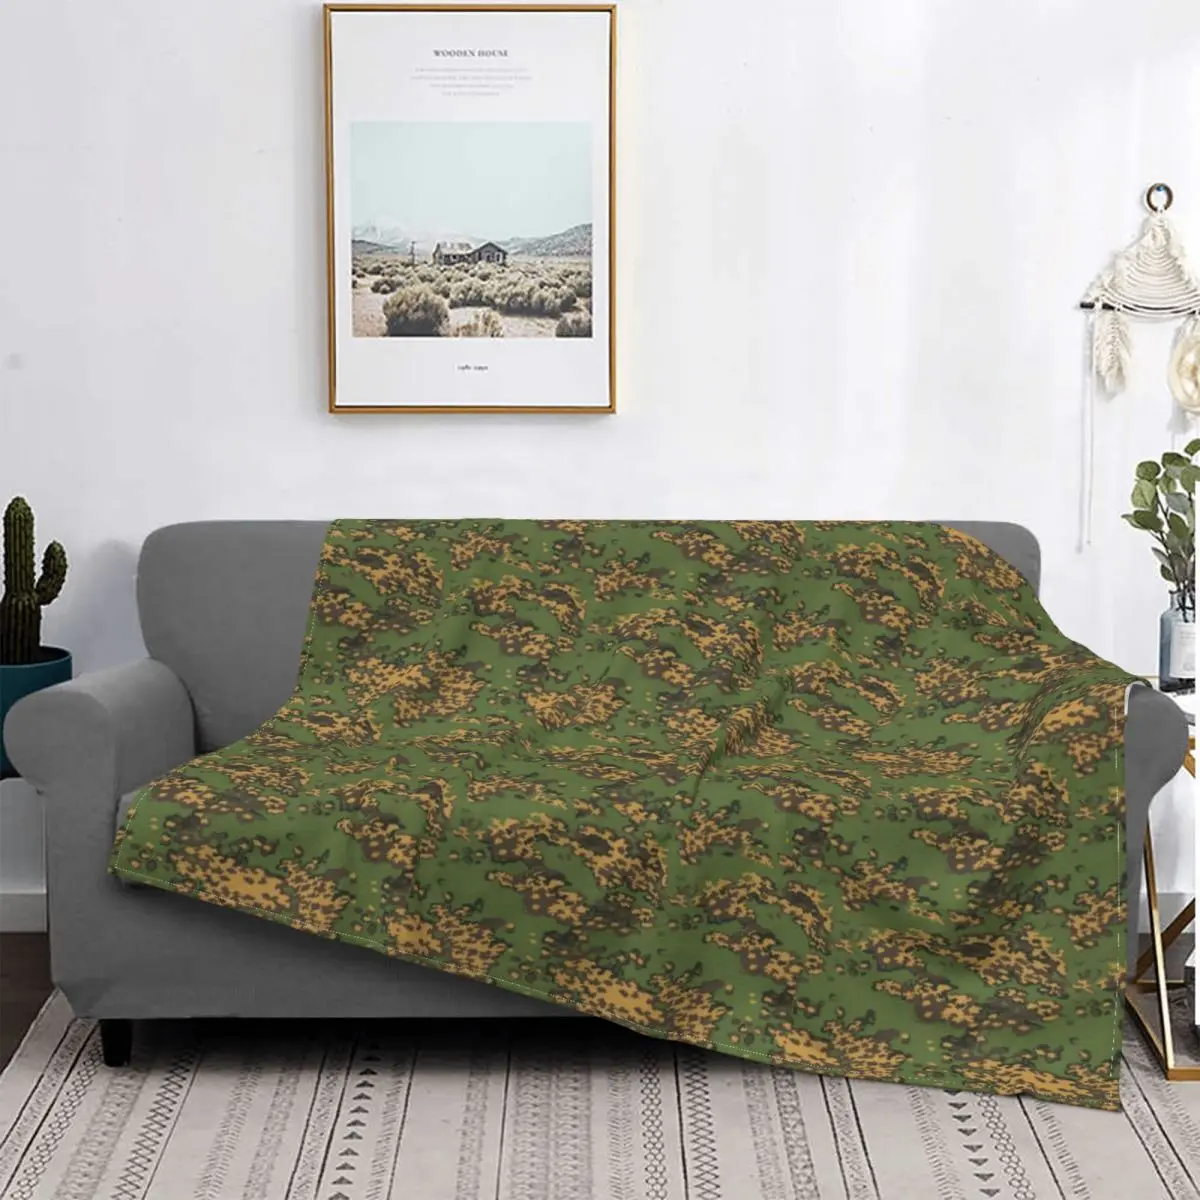 

Russian Woodland Camouflage Russian Blanket Fleece Autumn/Winter Popular Super Soft Throw Blanket for Bed Travel Quilt